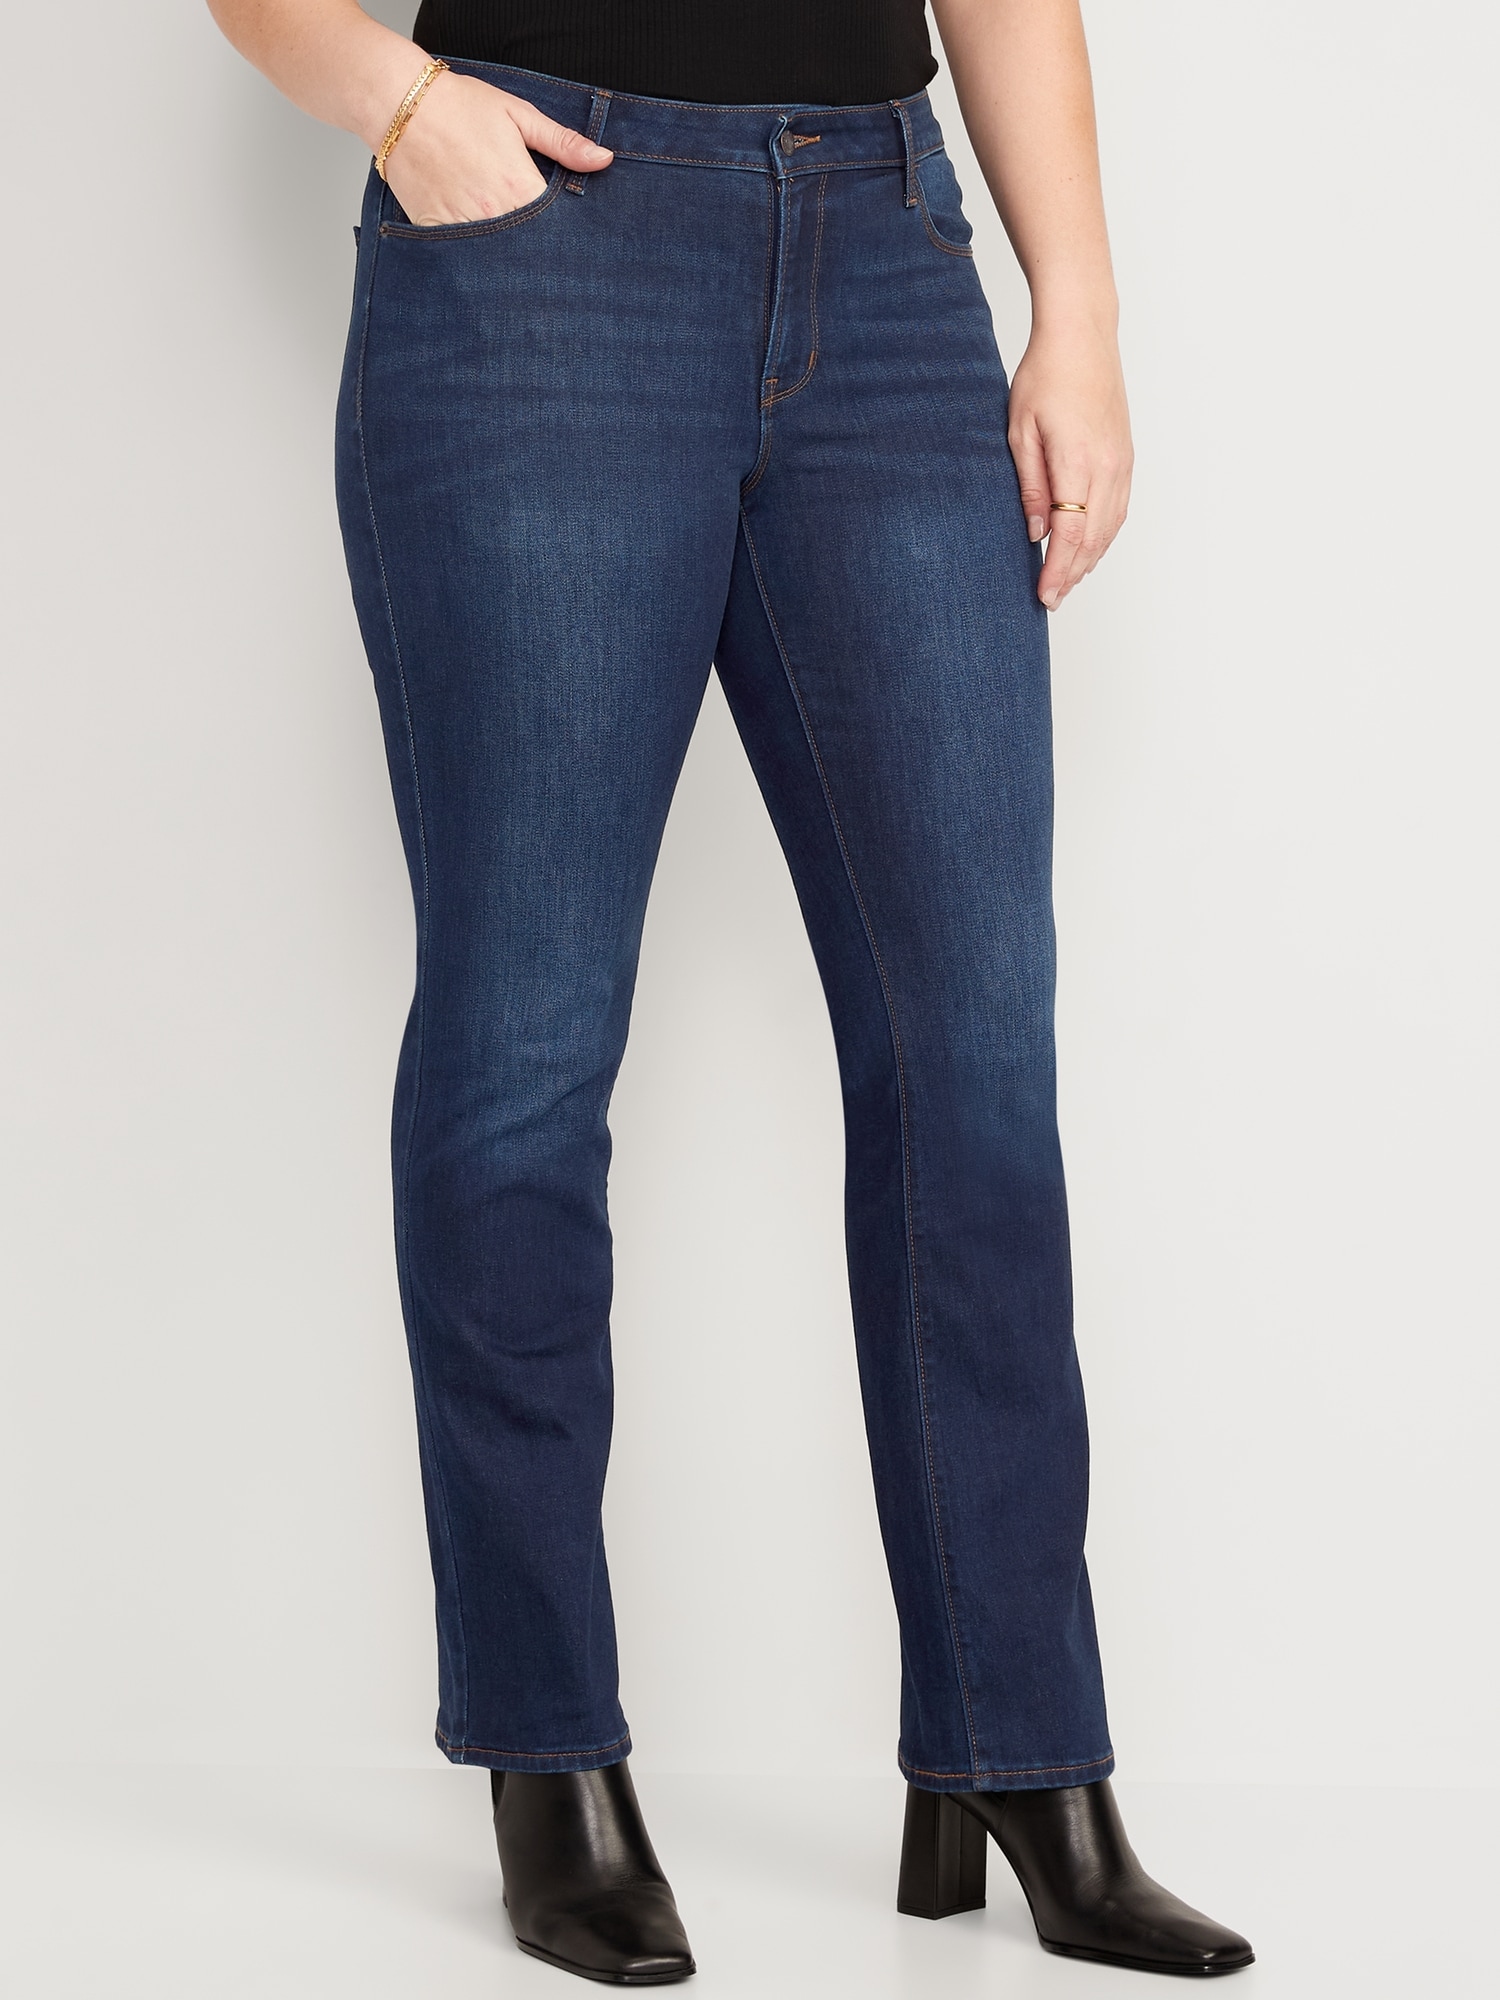 Old Navy Kens boot Cut jeans - analoggulf.com